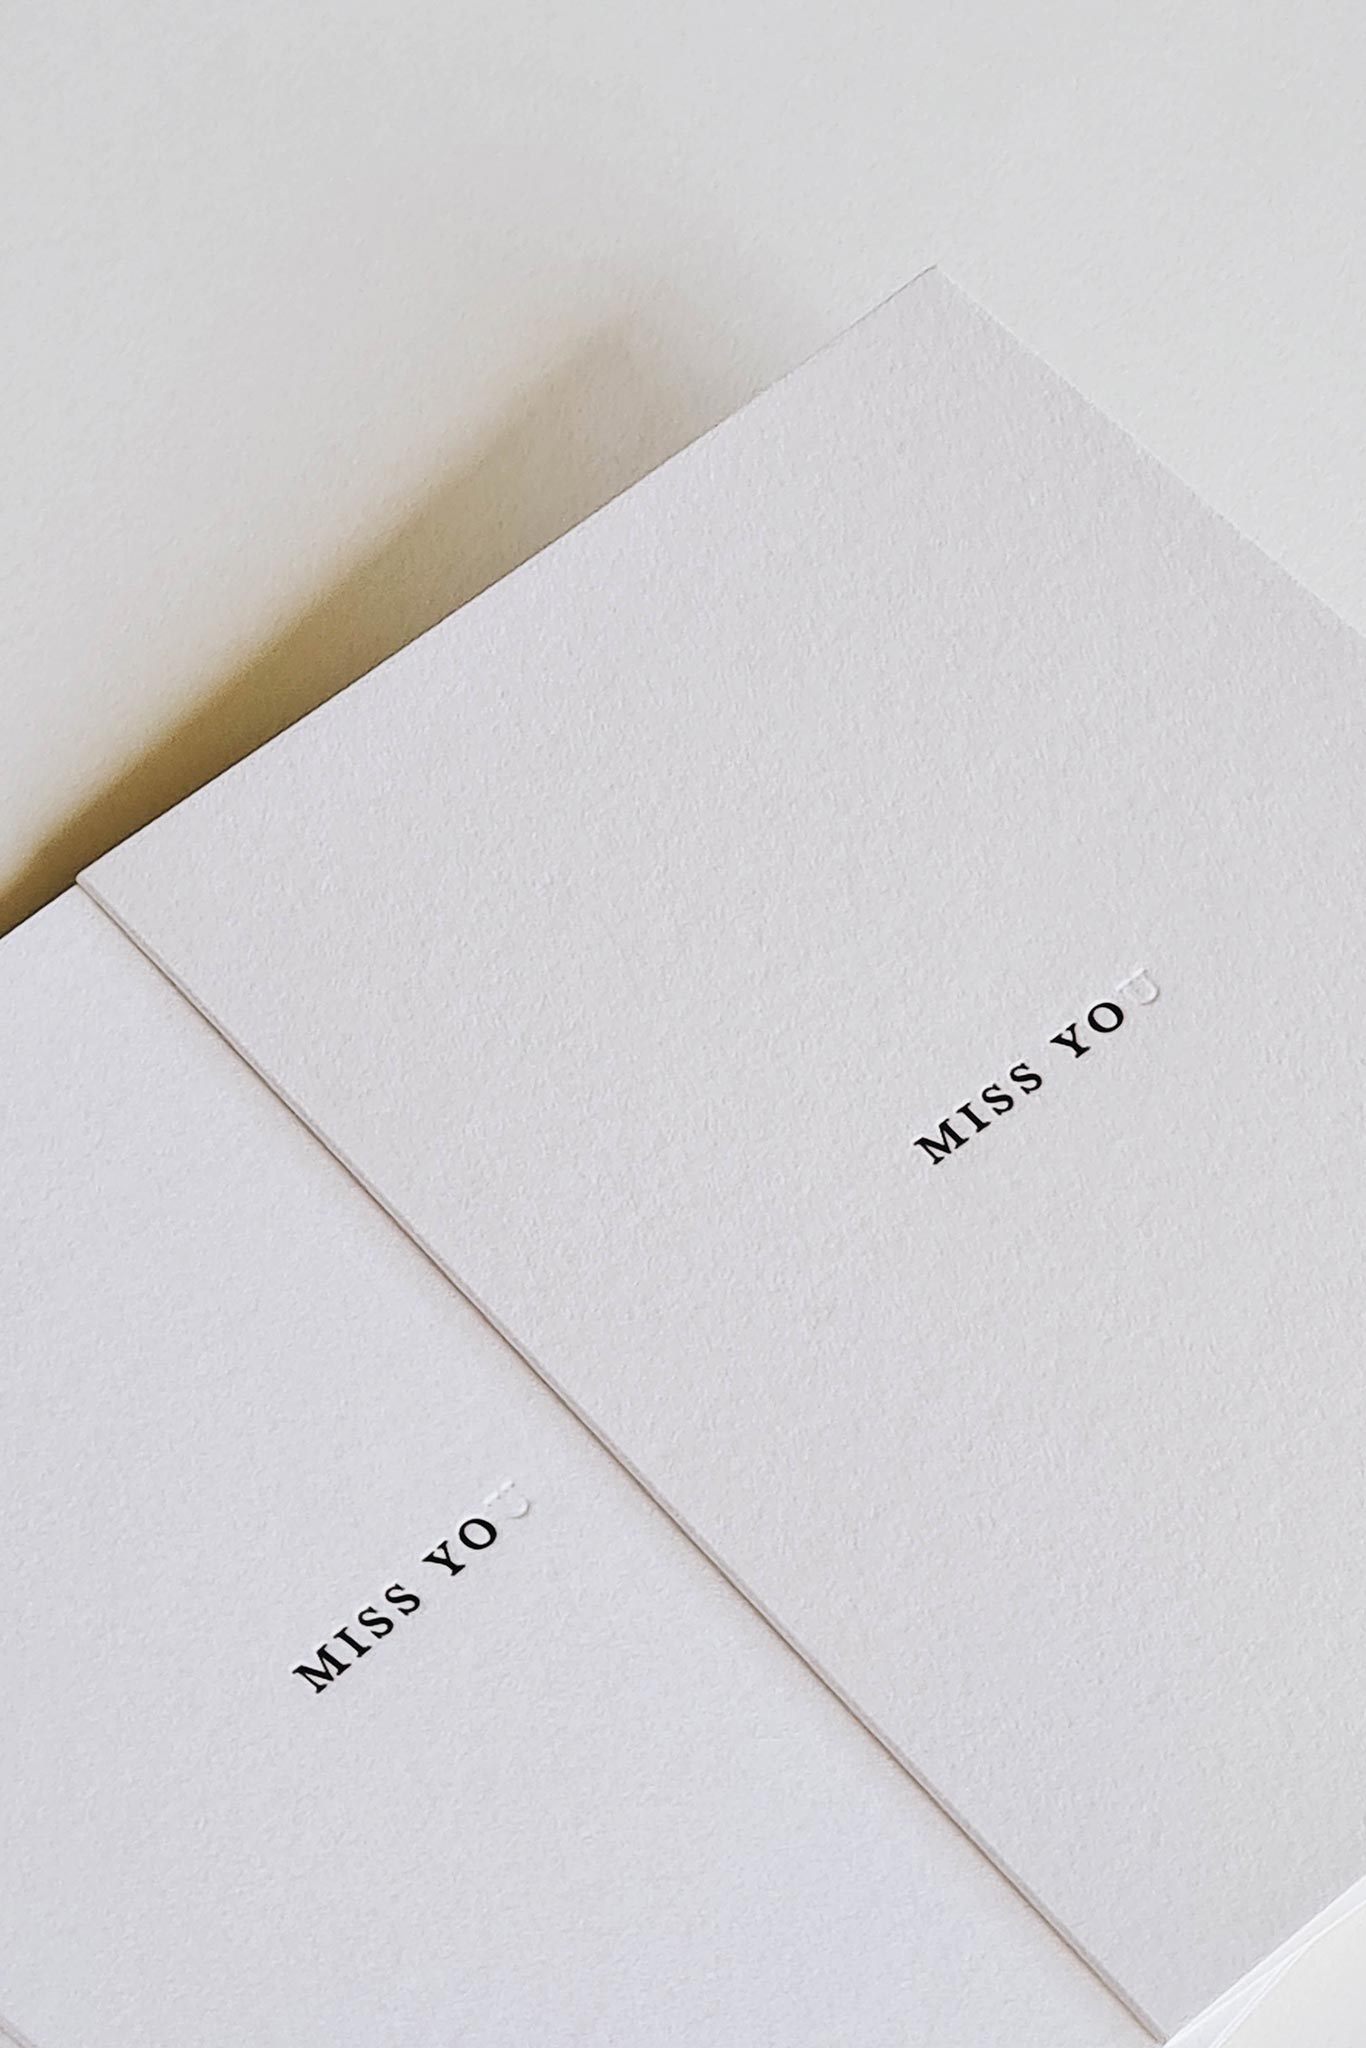 Greeting card - Miss You, Letterpress